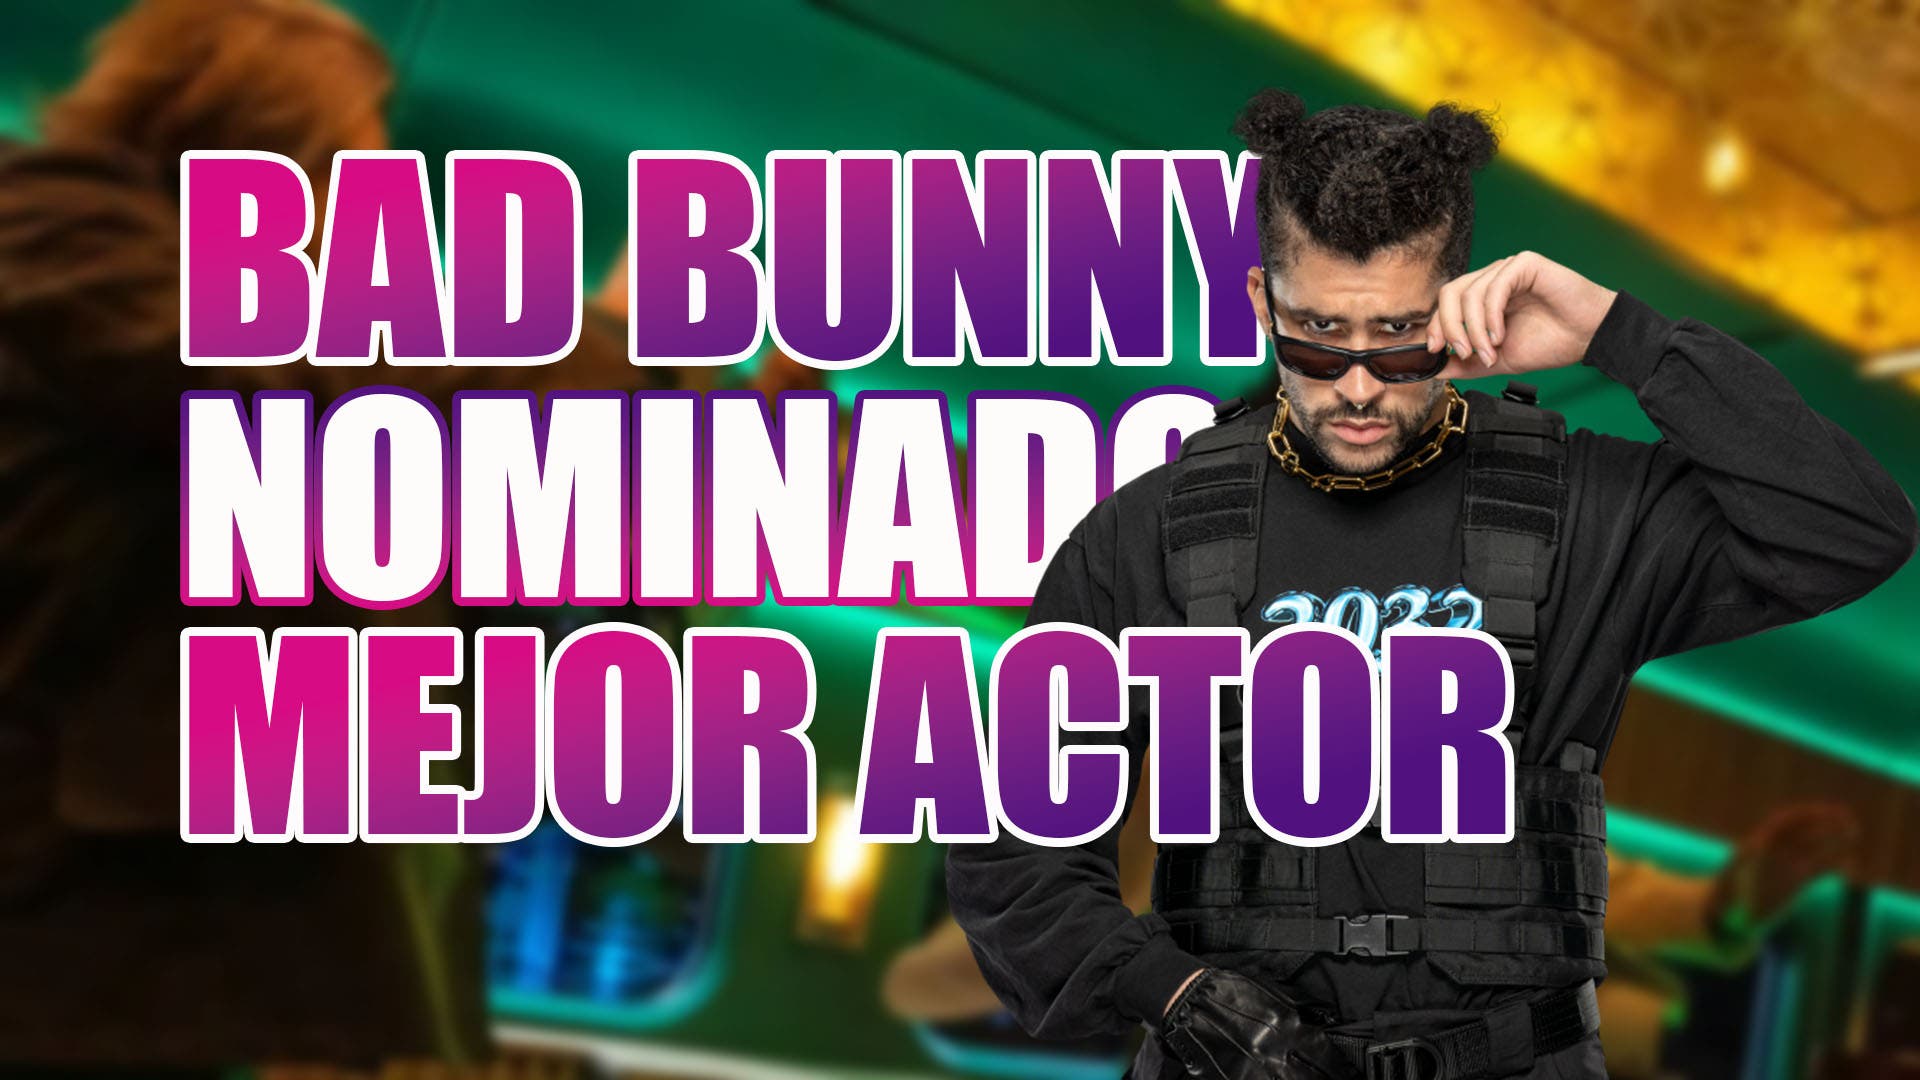 Why was Bad Bunny nominated for Best Actor at the 2023 MTV Movie & TV Awards?